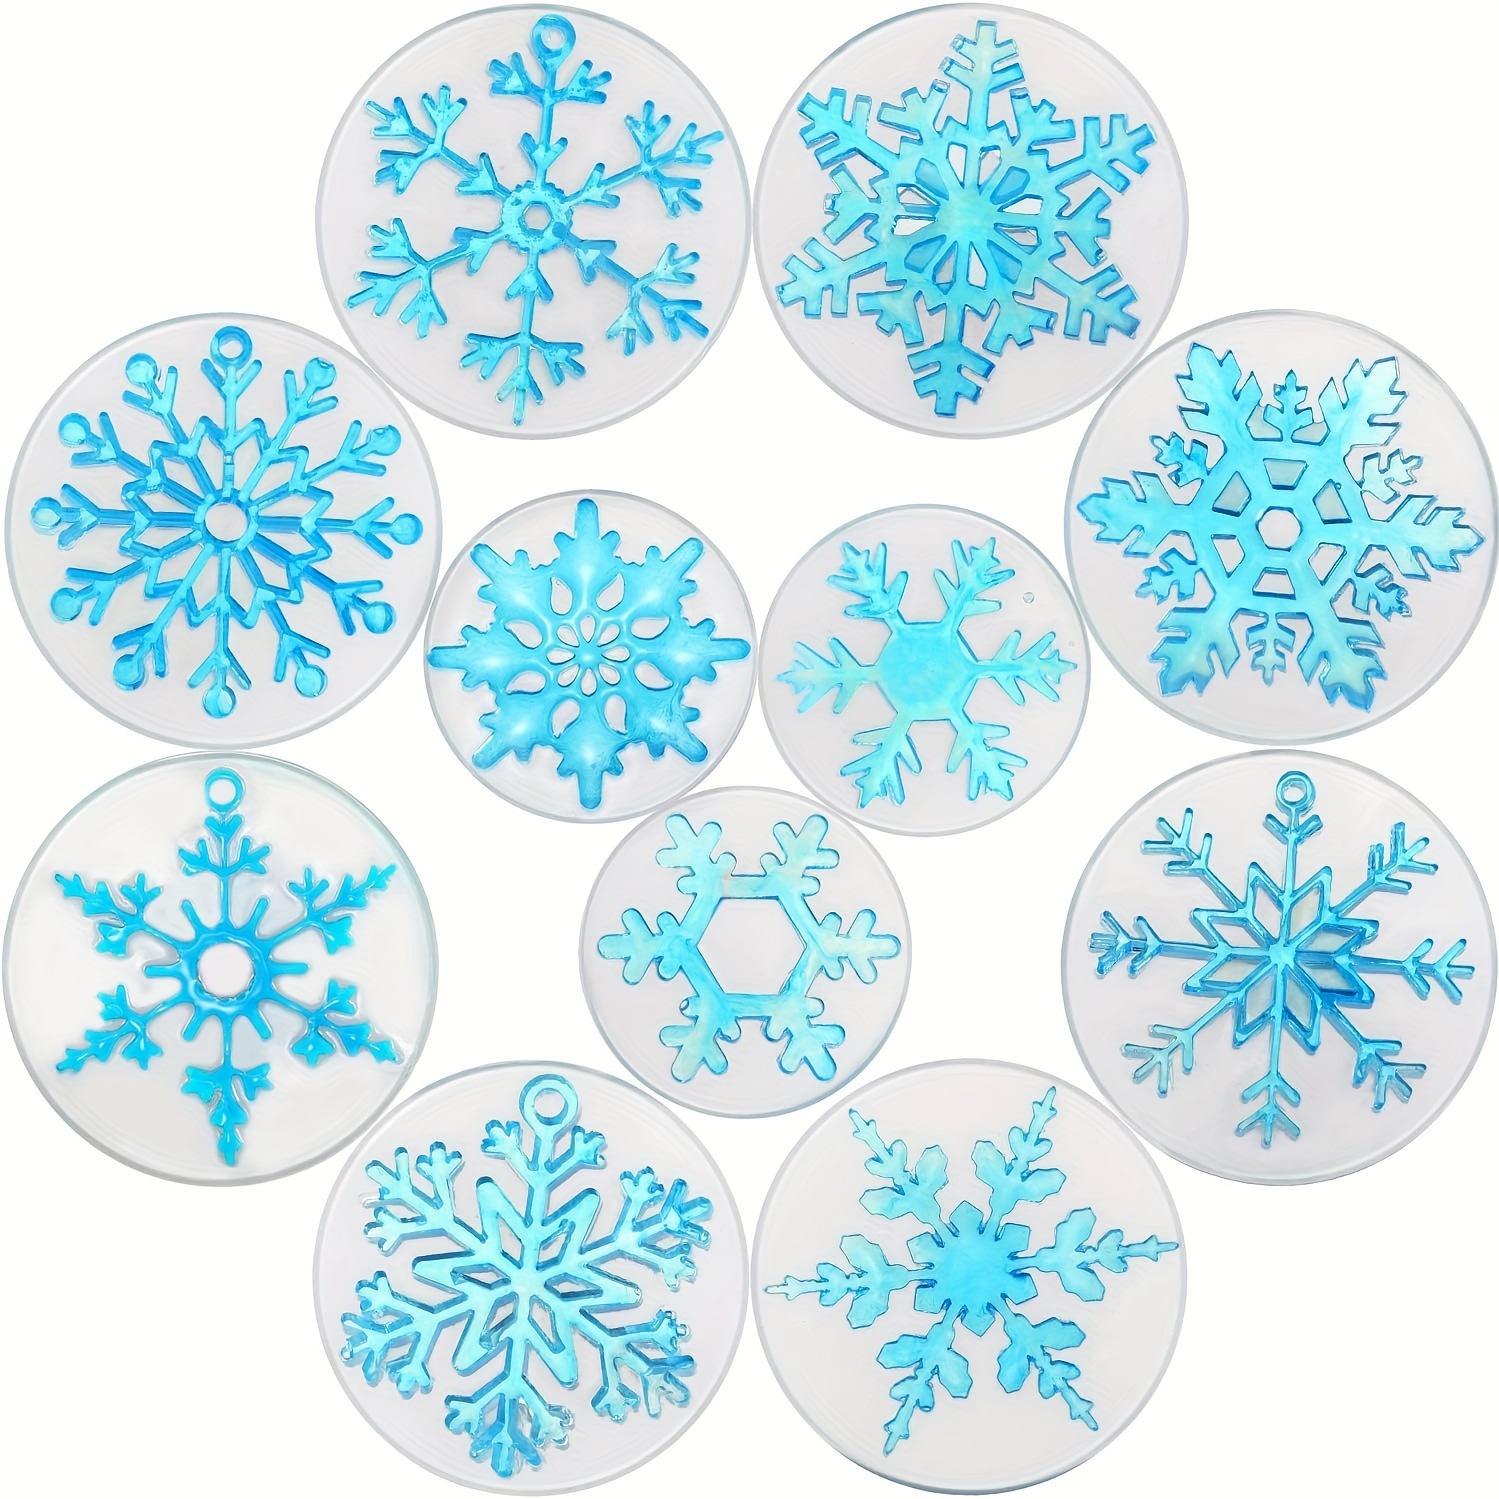 

11pcs Snowflake Resin Mold Snowflake Silicone Mold Snowflake Silicone Mold Snowflake Cast Soap Mold For Epoxy Diy Crafts Necklace Earrings Pendant Wedding Props Christmas Decoration